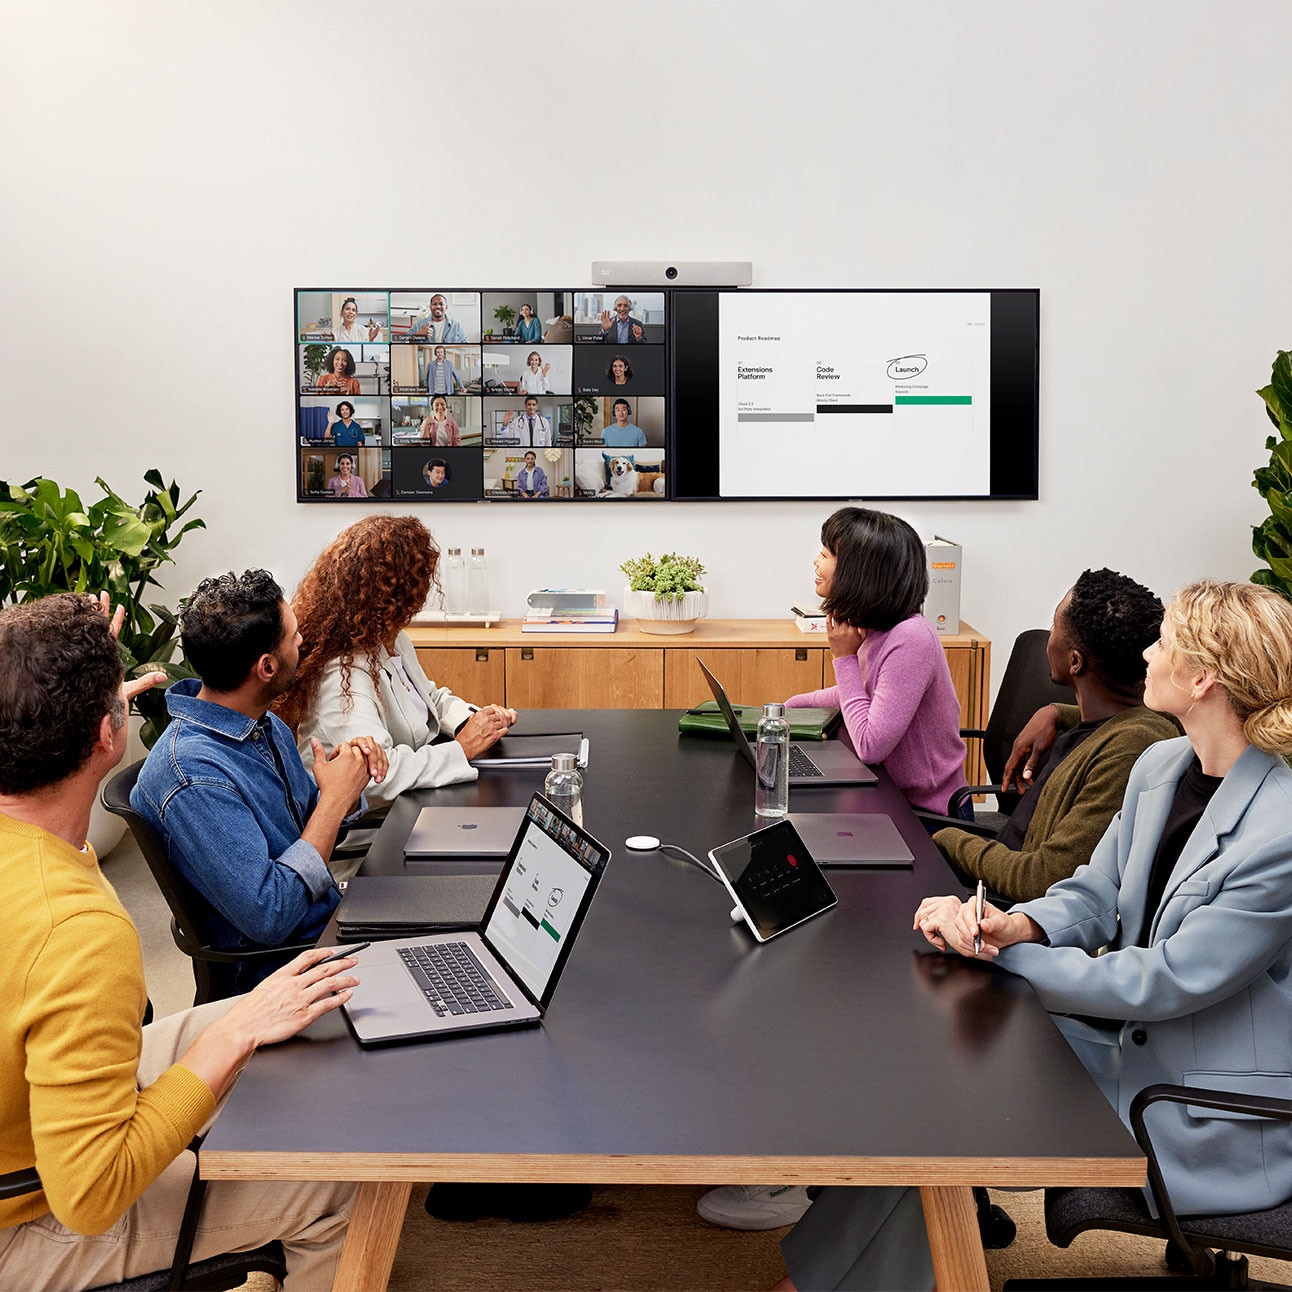 6 colleagues in a conference room video conference with several remote colleagues